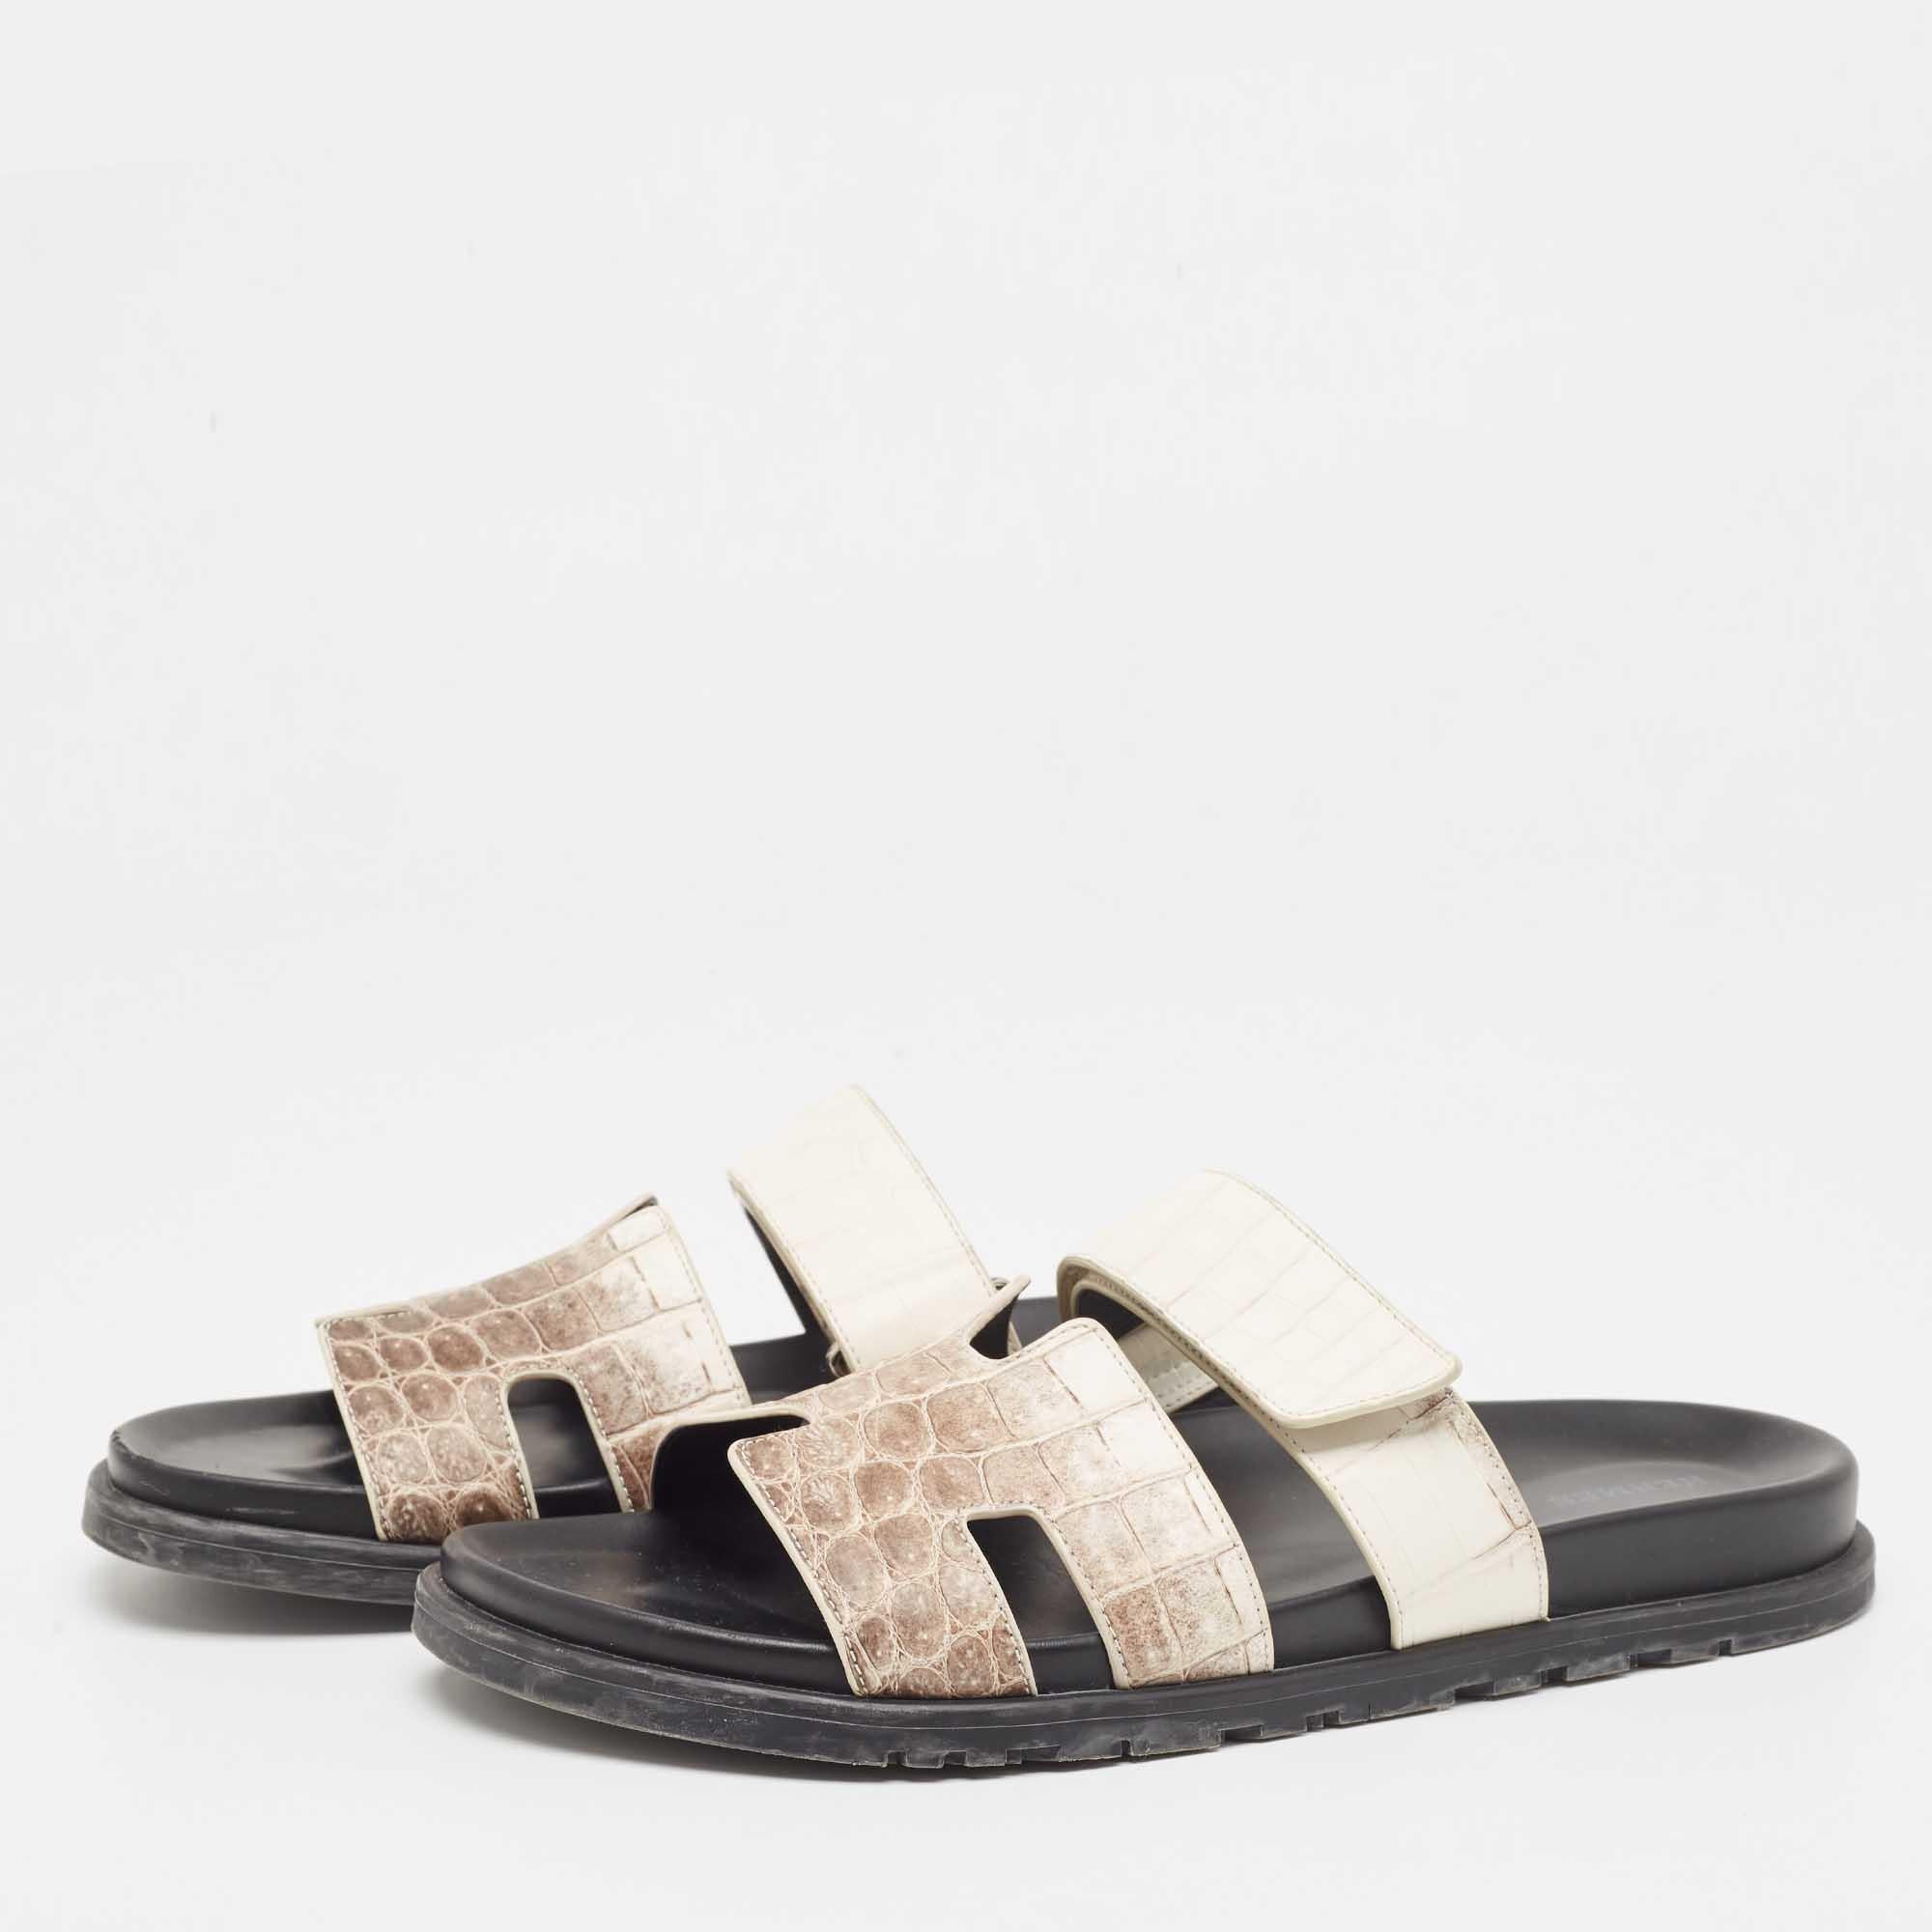 The Hermes Chypre sandal for men is a luxurious definition of casual urban style. The flats have the signature H strap and a single adjustable strap on the upper, and the soles are finished in rubber. The sleek design is meant to look great on your